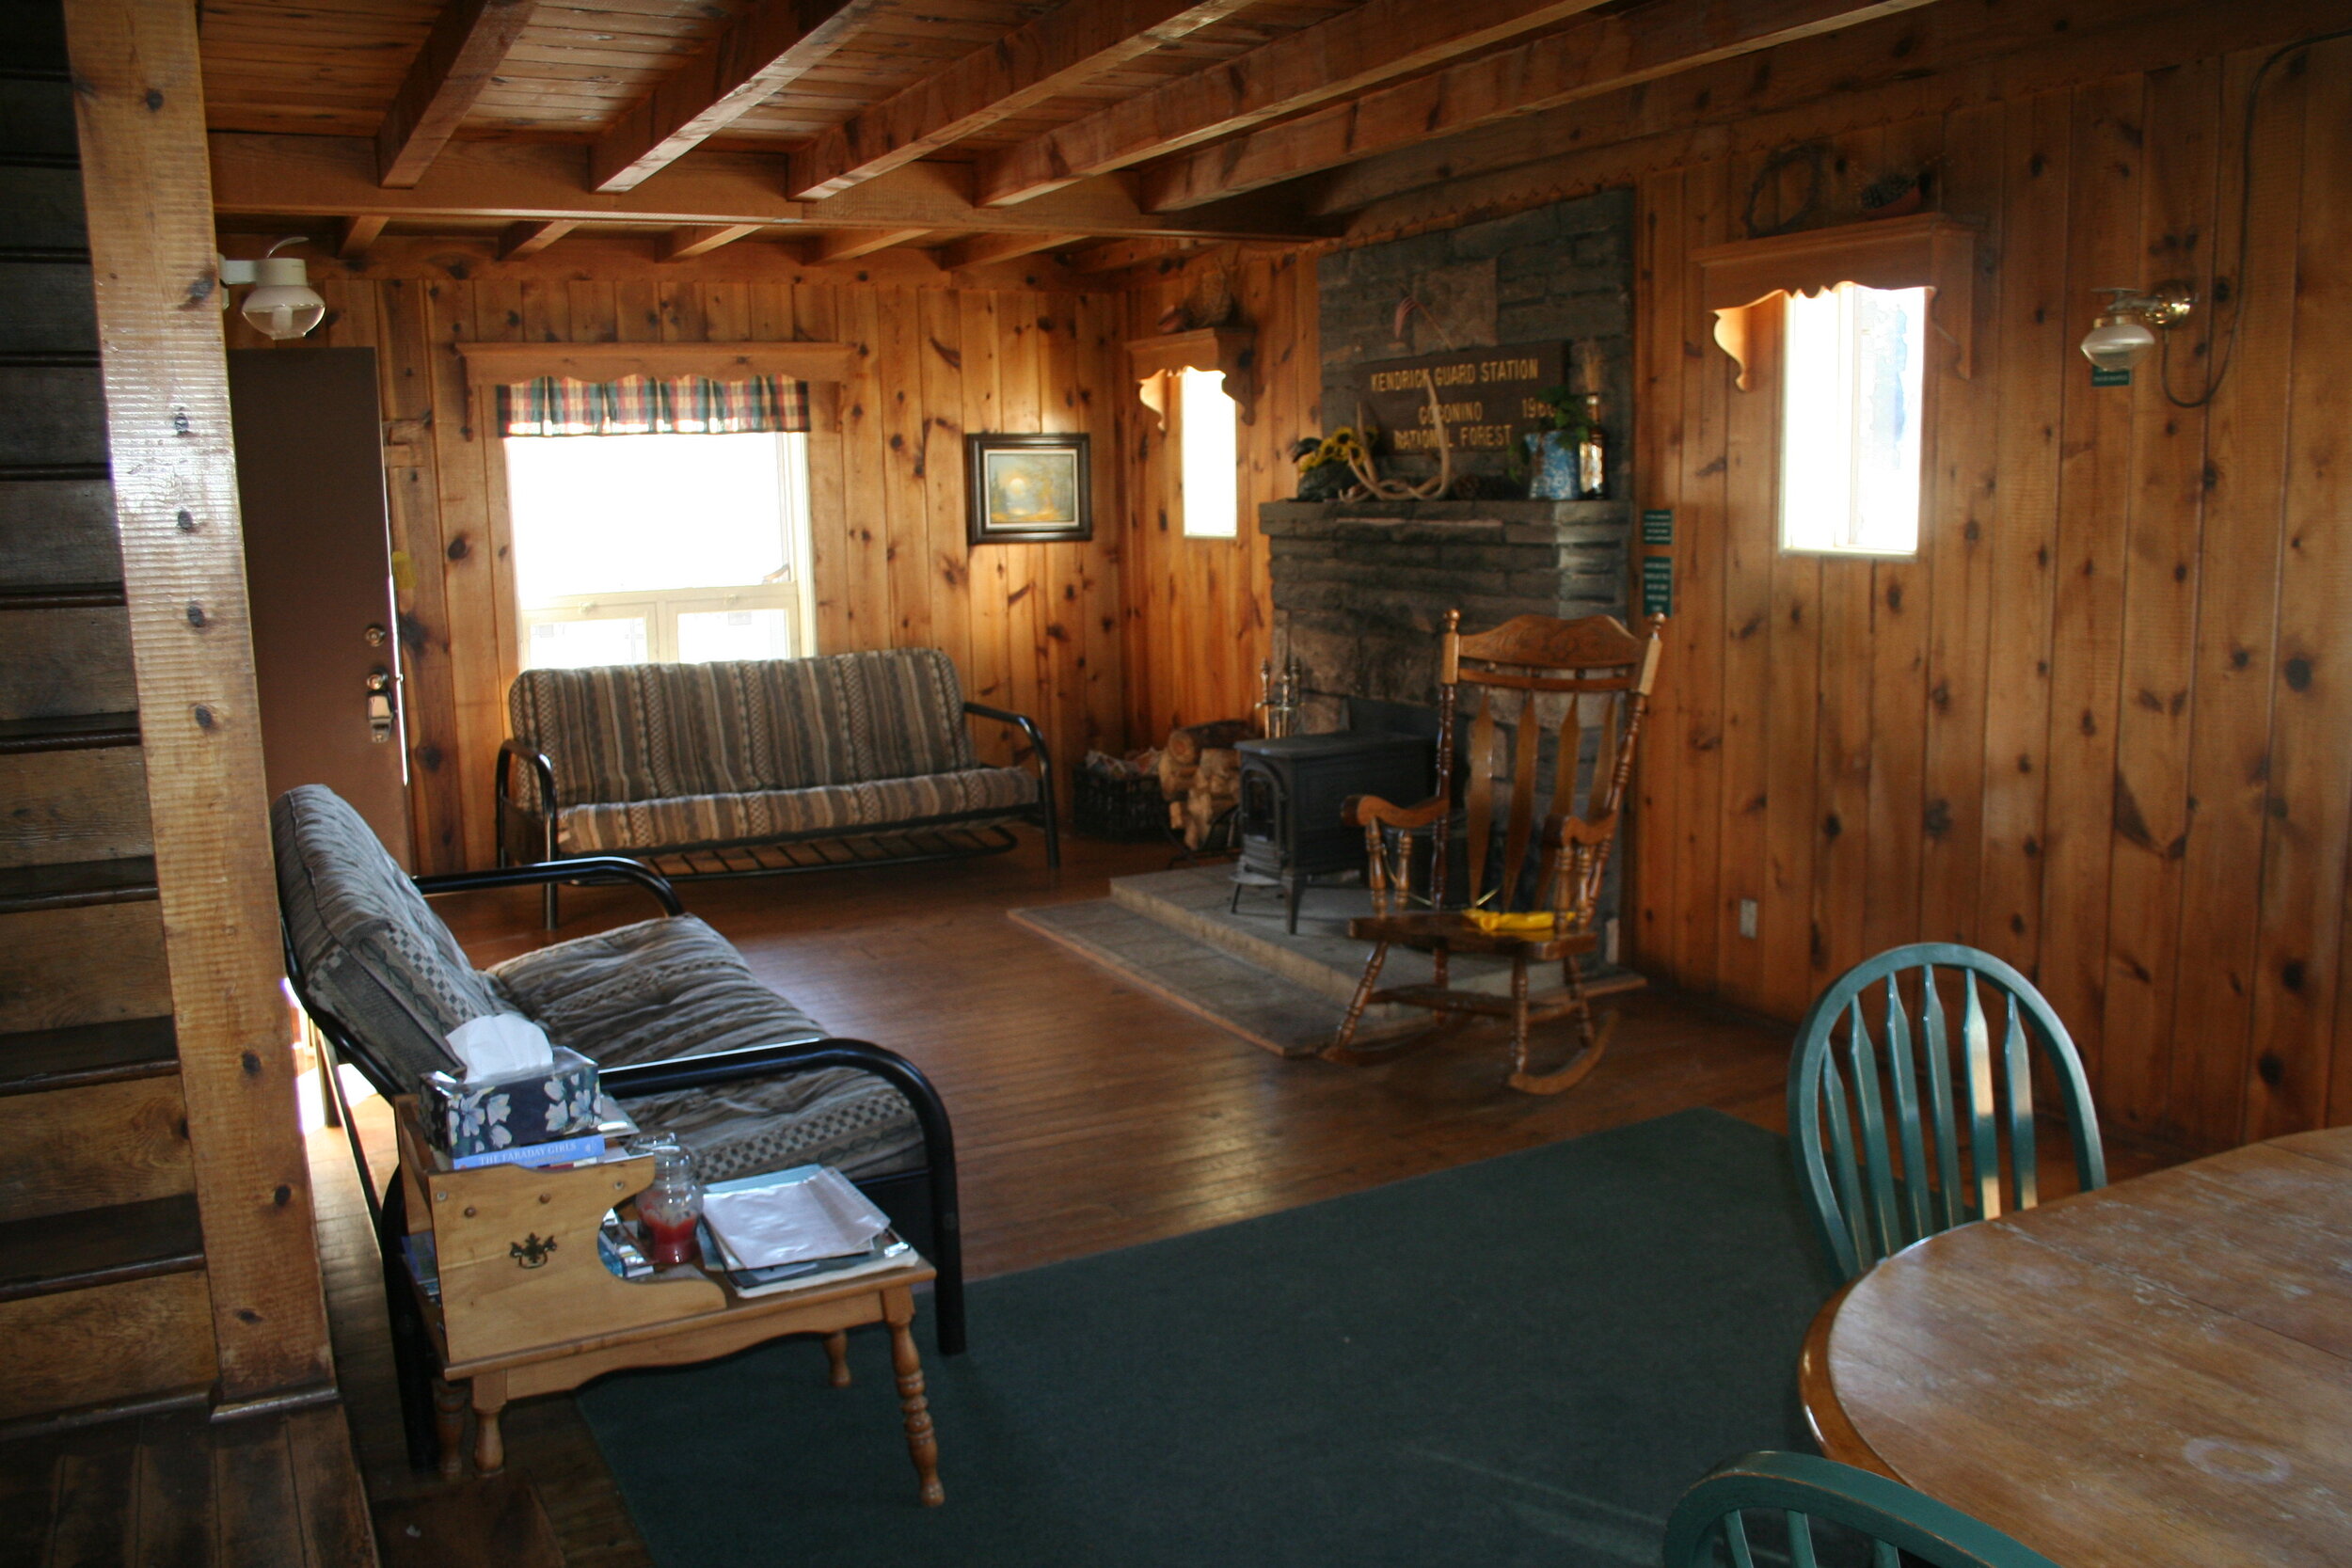   An inside view of Kendrick Cabin.  